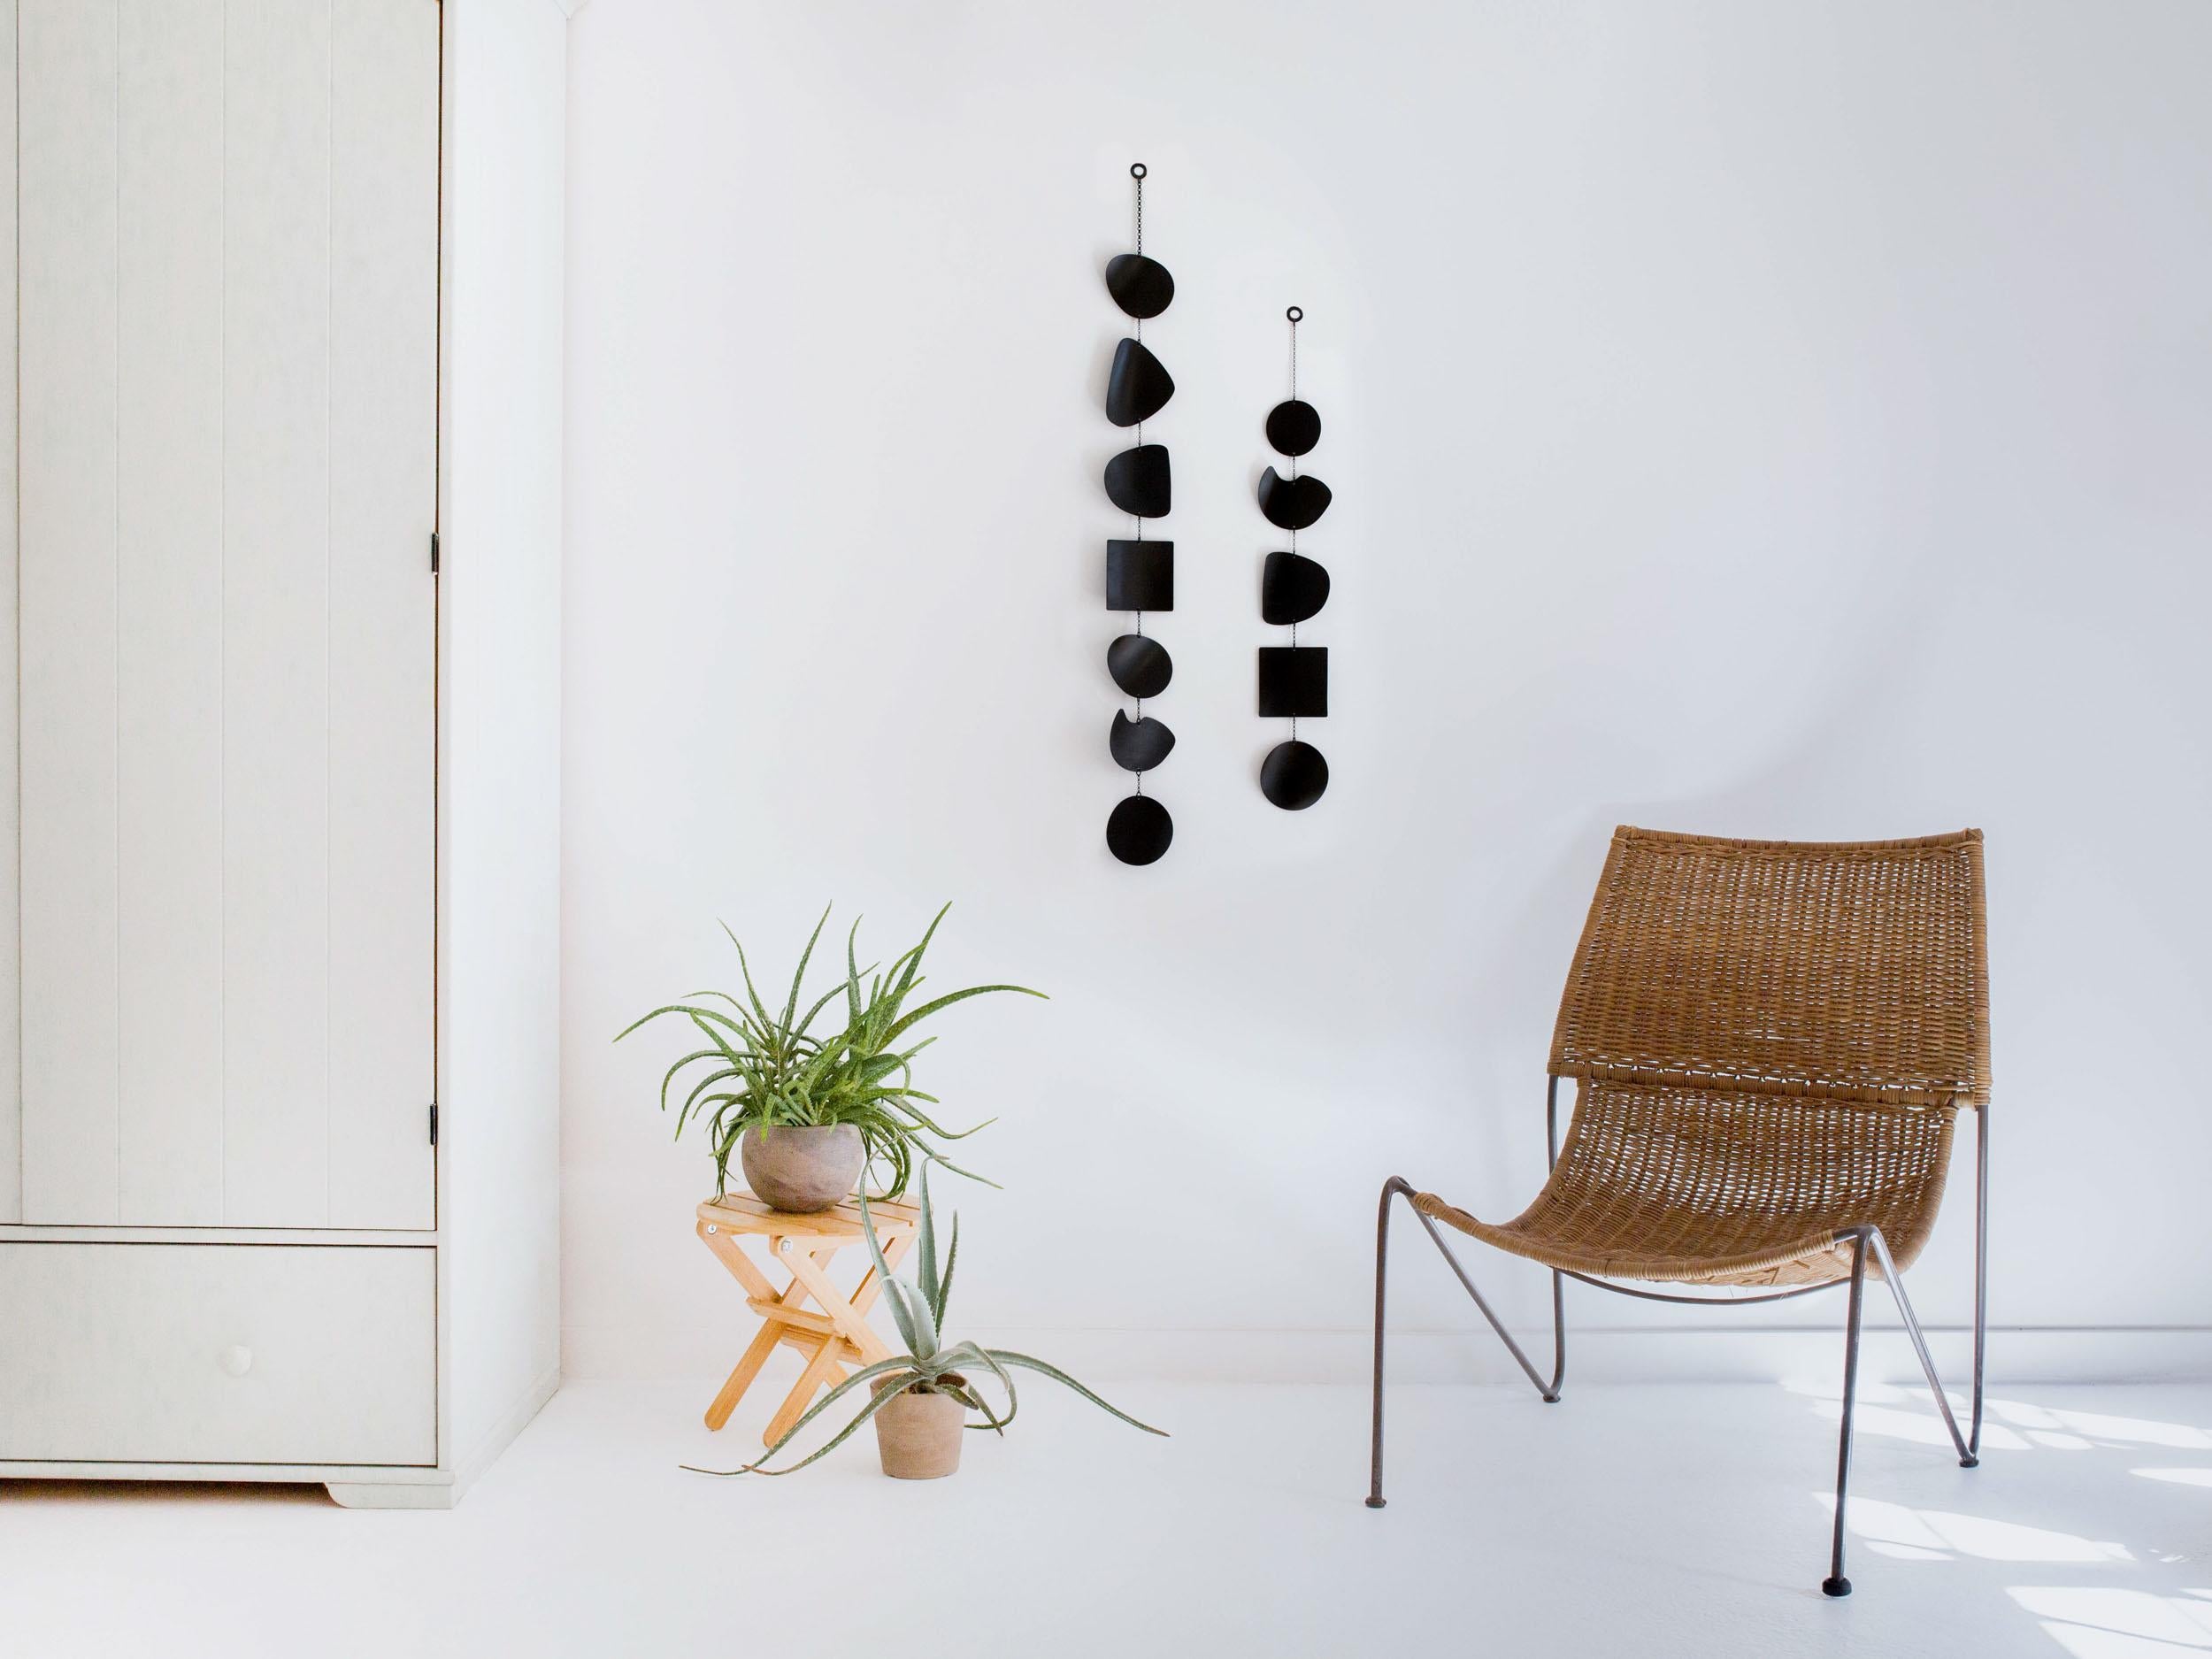 The Mineral wall hanging draws inspiration from the worn shapes of river rocks. The organic curved shapes and striking black patina finish create inviting dimension. Ideal for narrow spaces, this smaller vertical piece can also be hung with the